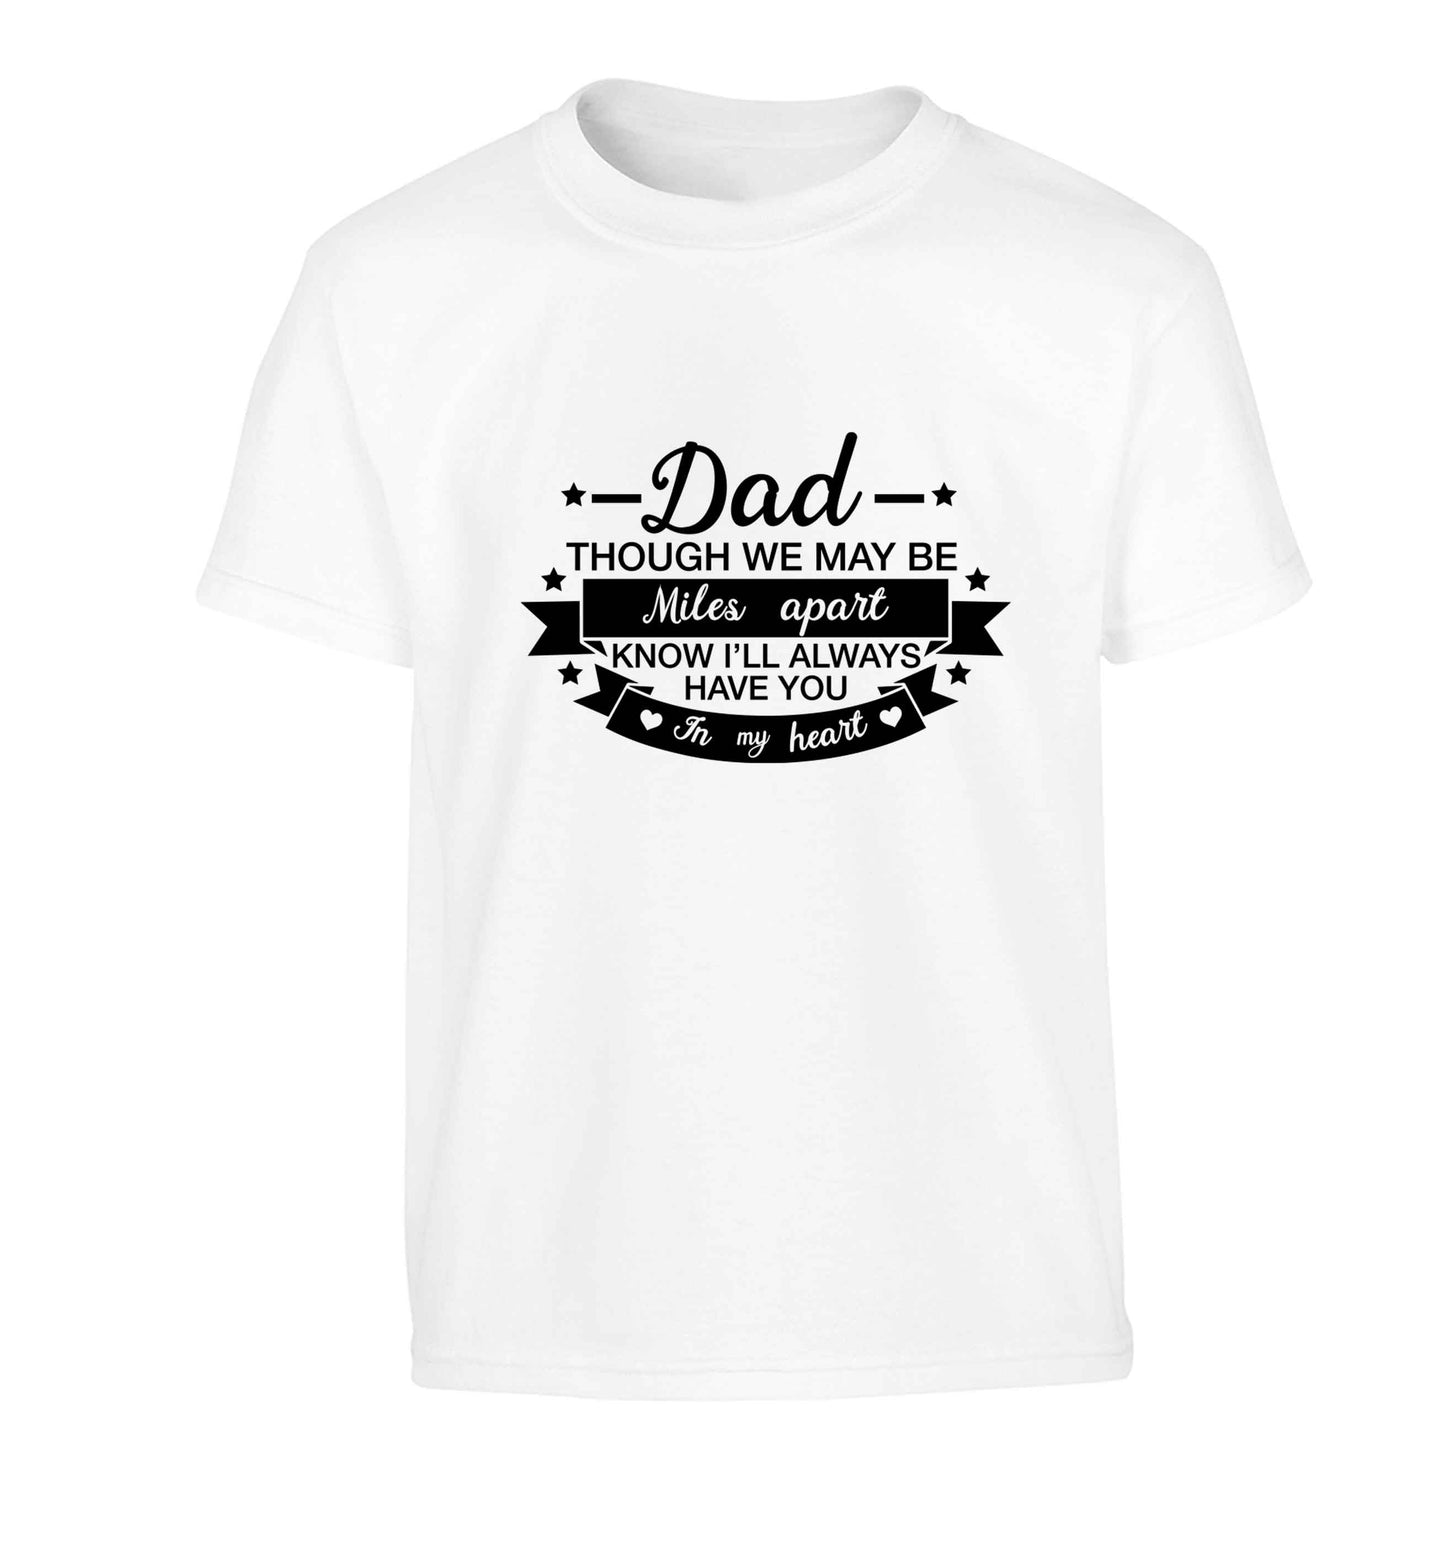 Dad though we are miles apart know I'll always have you in my heart Children's white Tshirt 12-13 Years